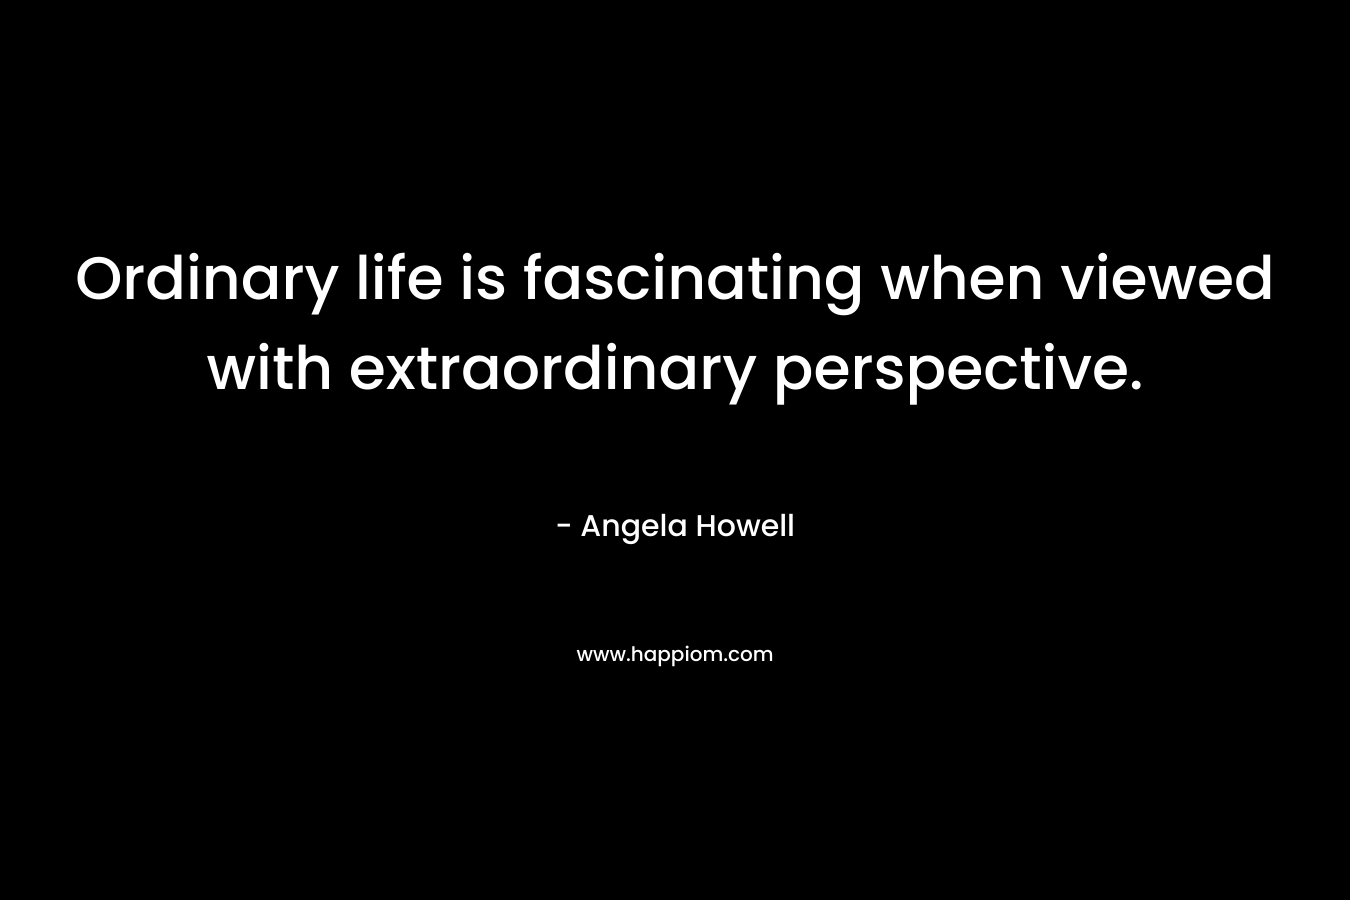 Ordinary life is fascinating when viewed with extraordinary perspective. – Angela Howell